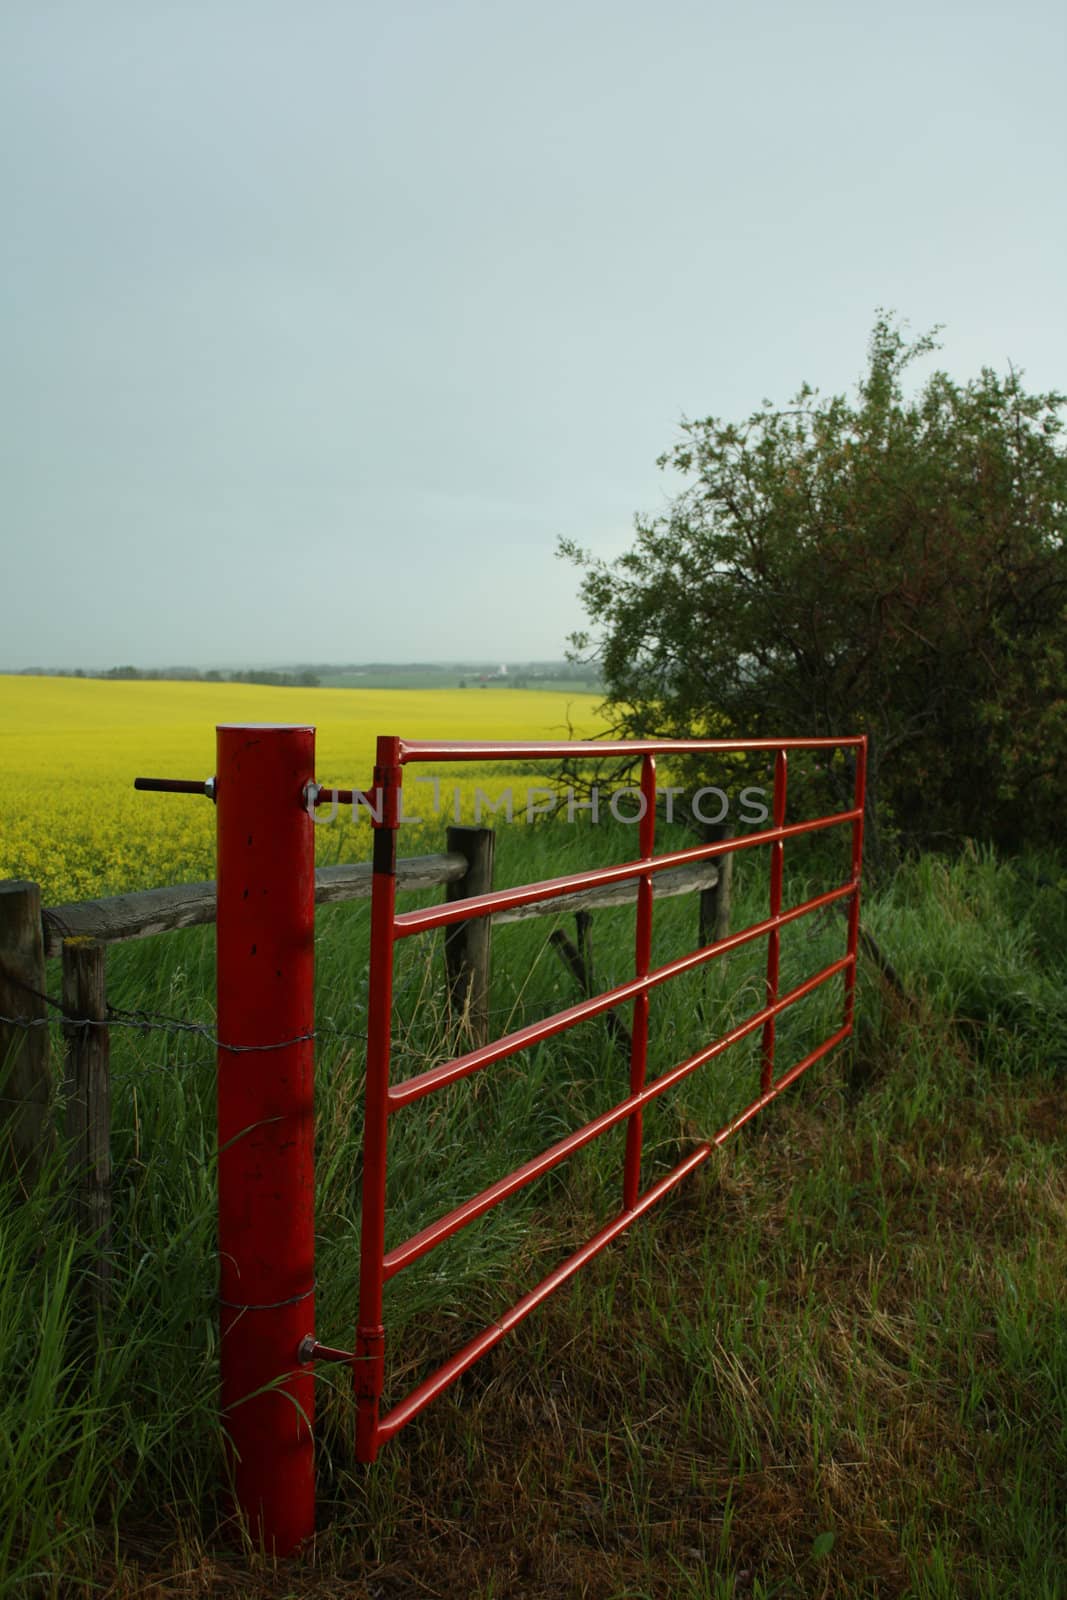 A red farm gate by a yellow blooming canola field.